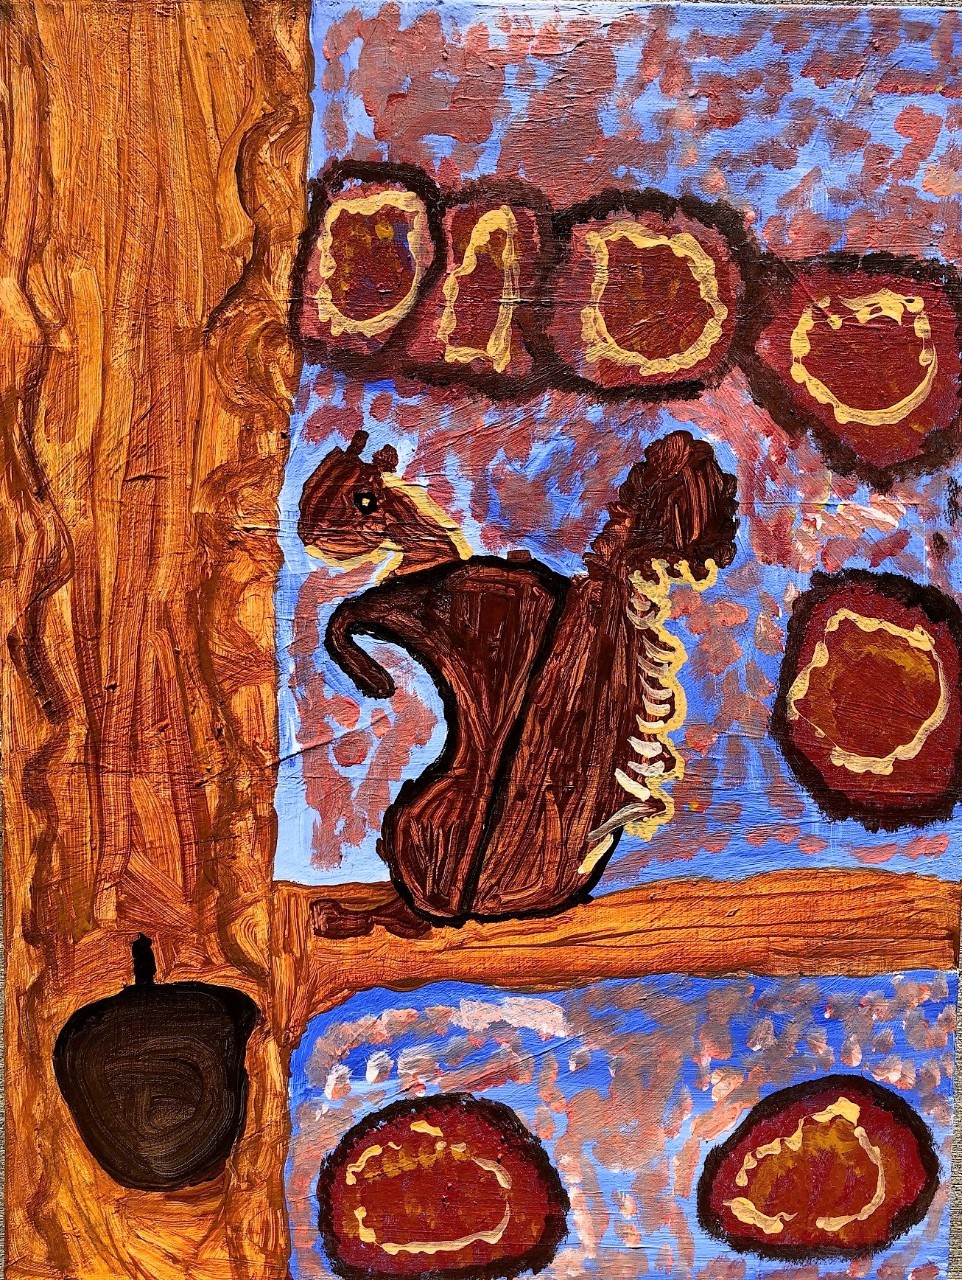 a painting of a brown squirrel on a tree branch surrounded by acorns. The painting is a bit rough and textured with browns and yellows and blue in the background behind the branches and squirrel.